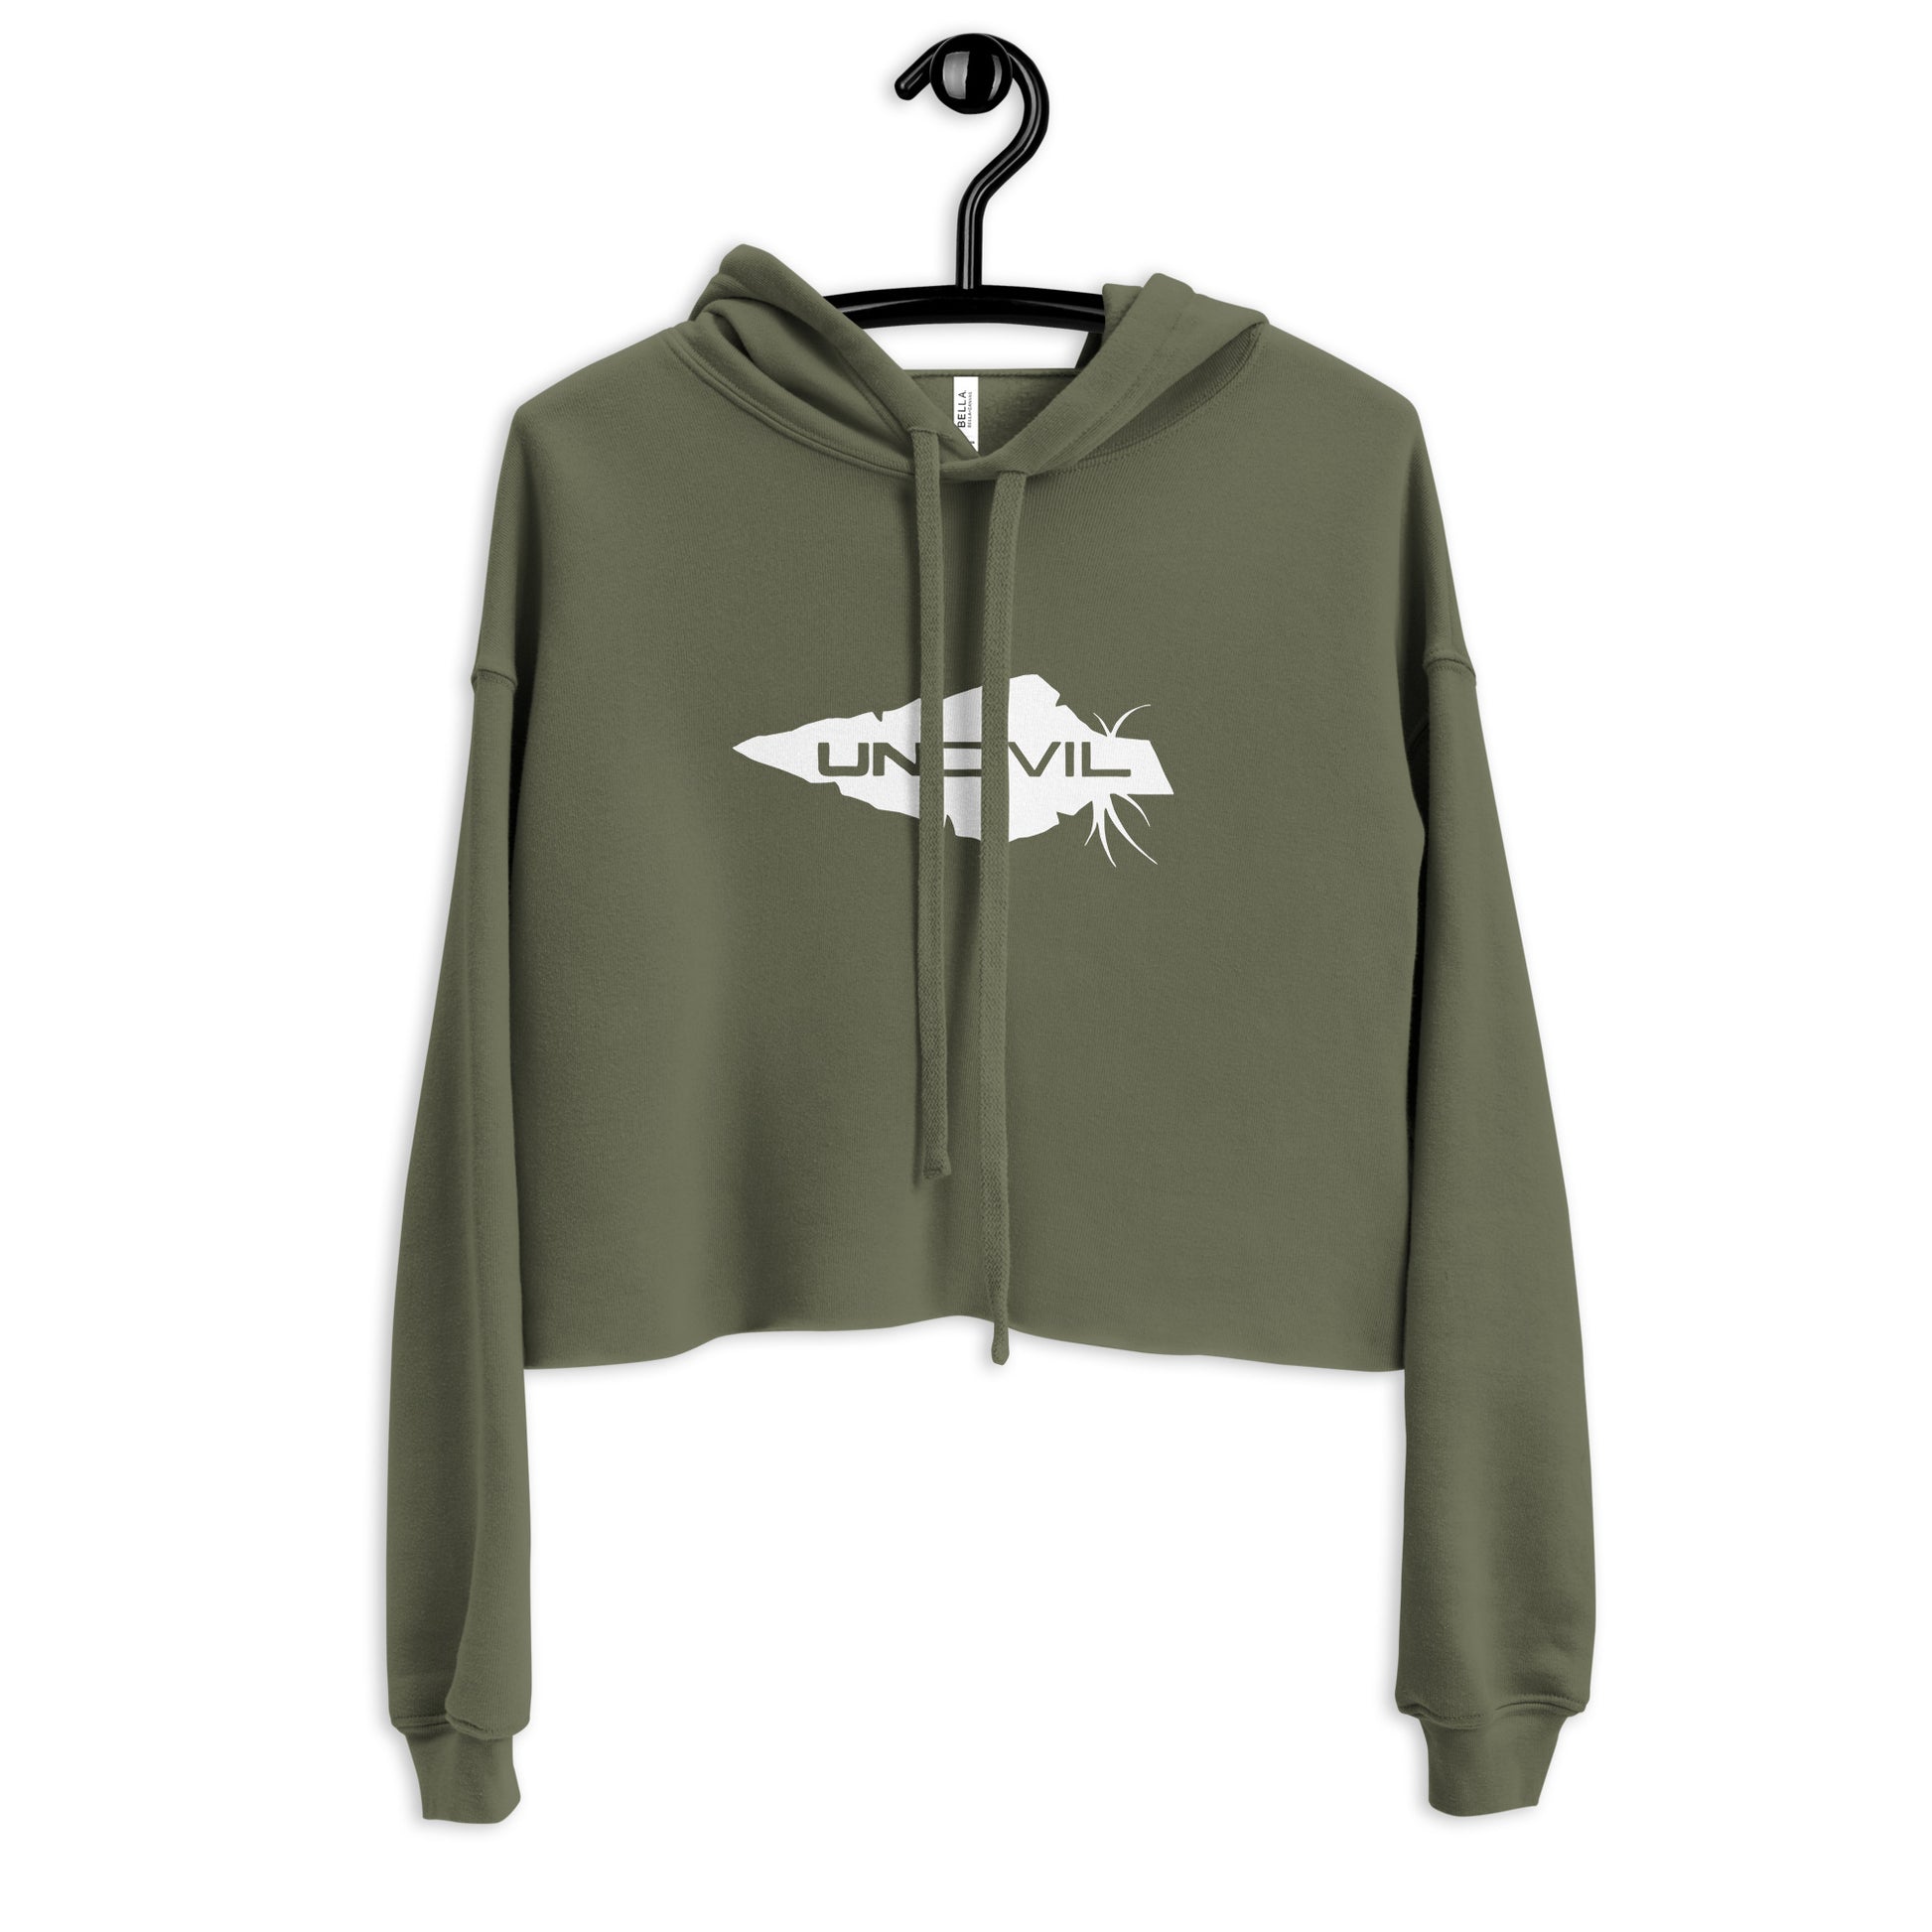 UNCIVIL women's Crop Hoodie is soft and comfy! this crop hoodie features our one and only white spear on Military Green hoodie!